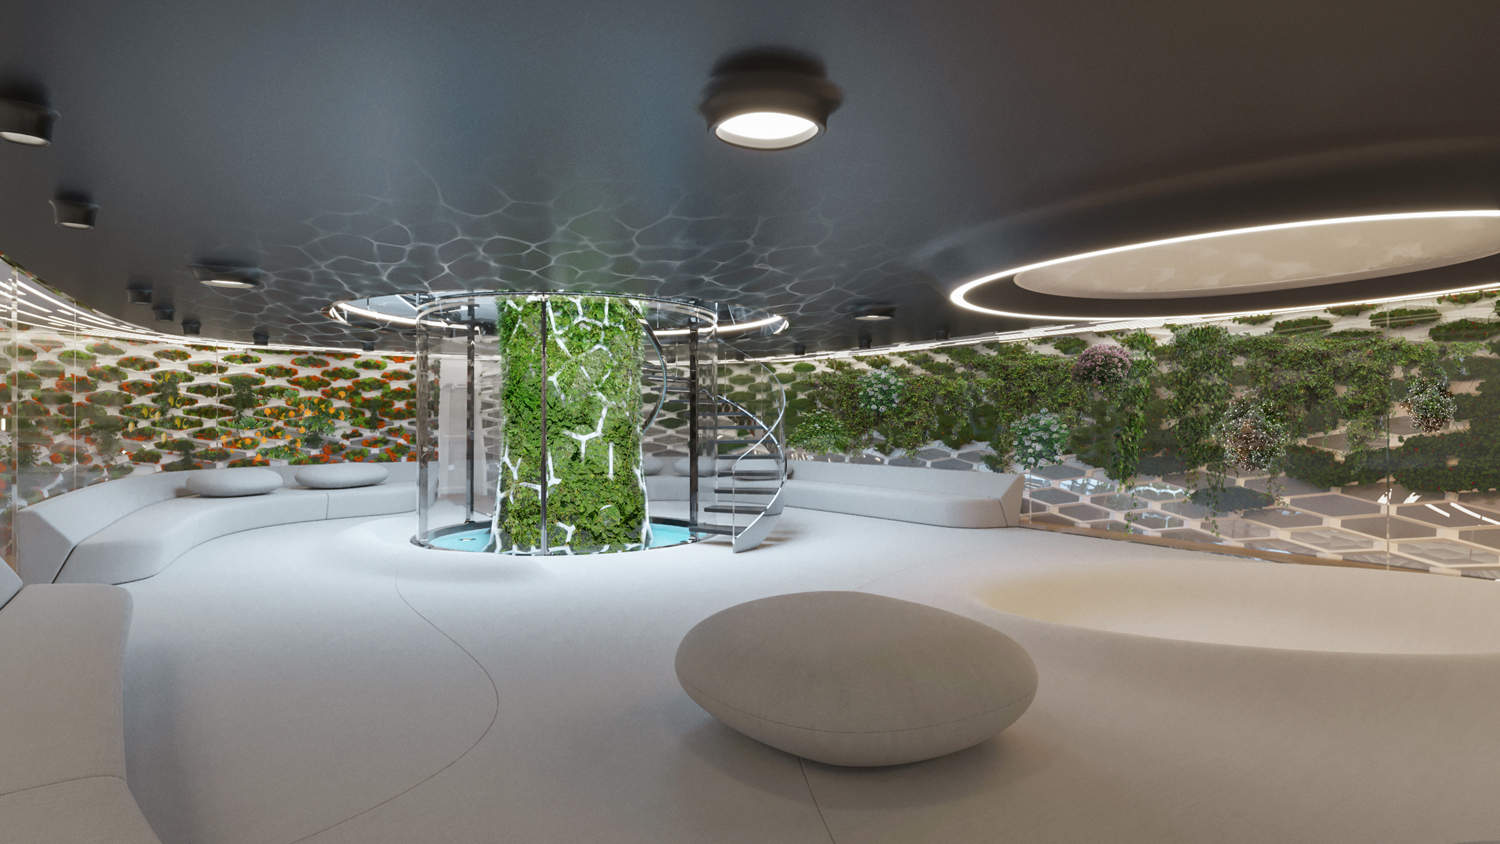 The hydroponic garden in the Pegasus superyacht concept is embedded with vegetables, herbs and flowers, and also provides the yacht with air purification - Effect Magazine